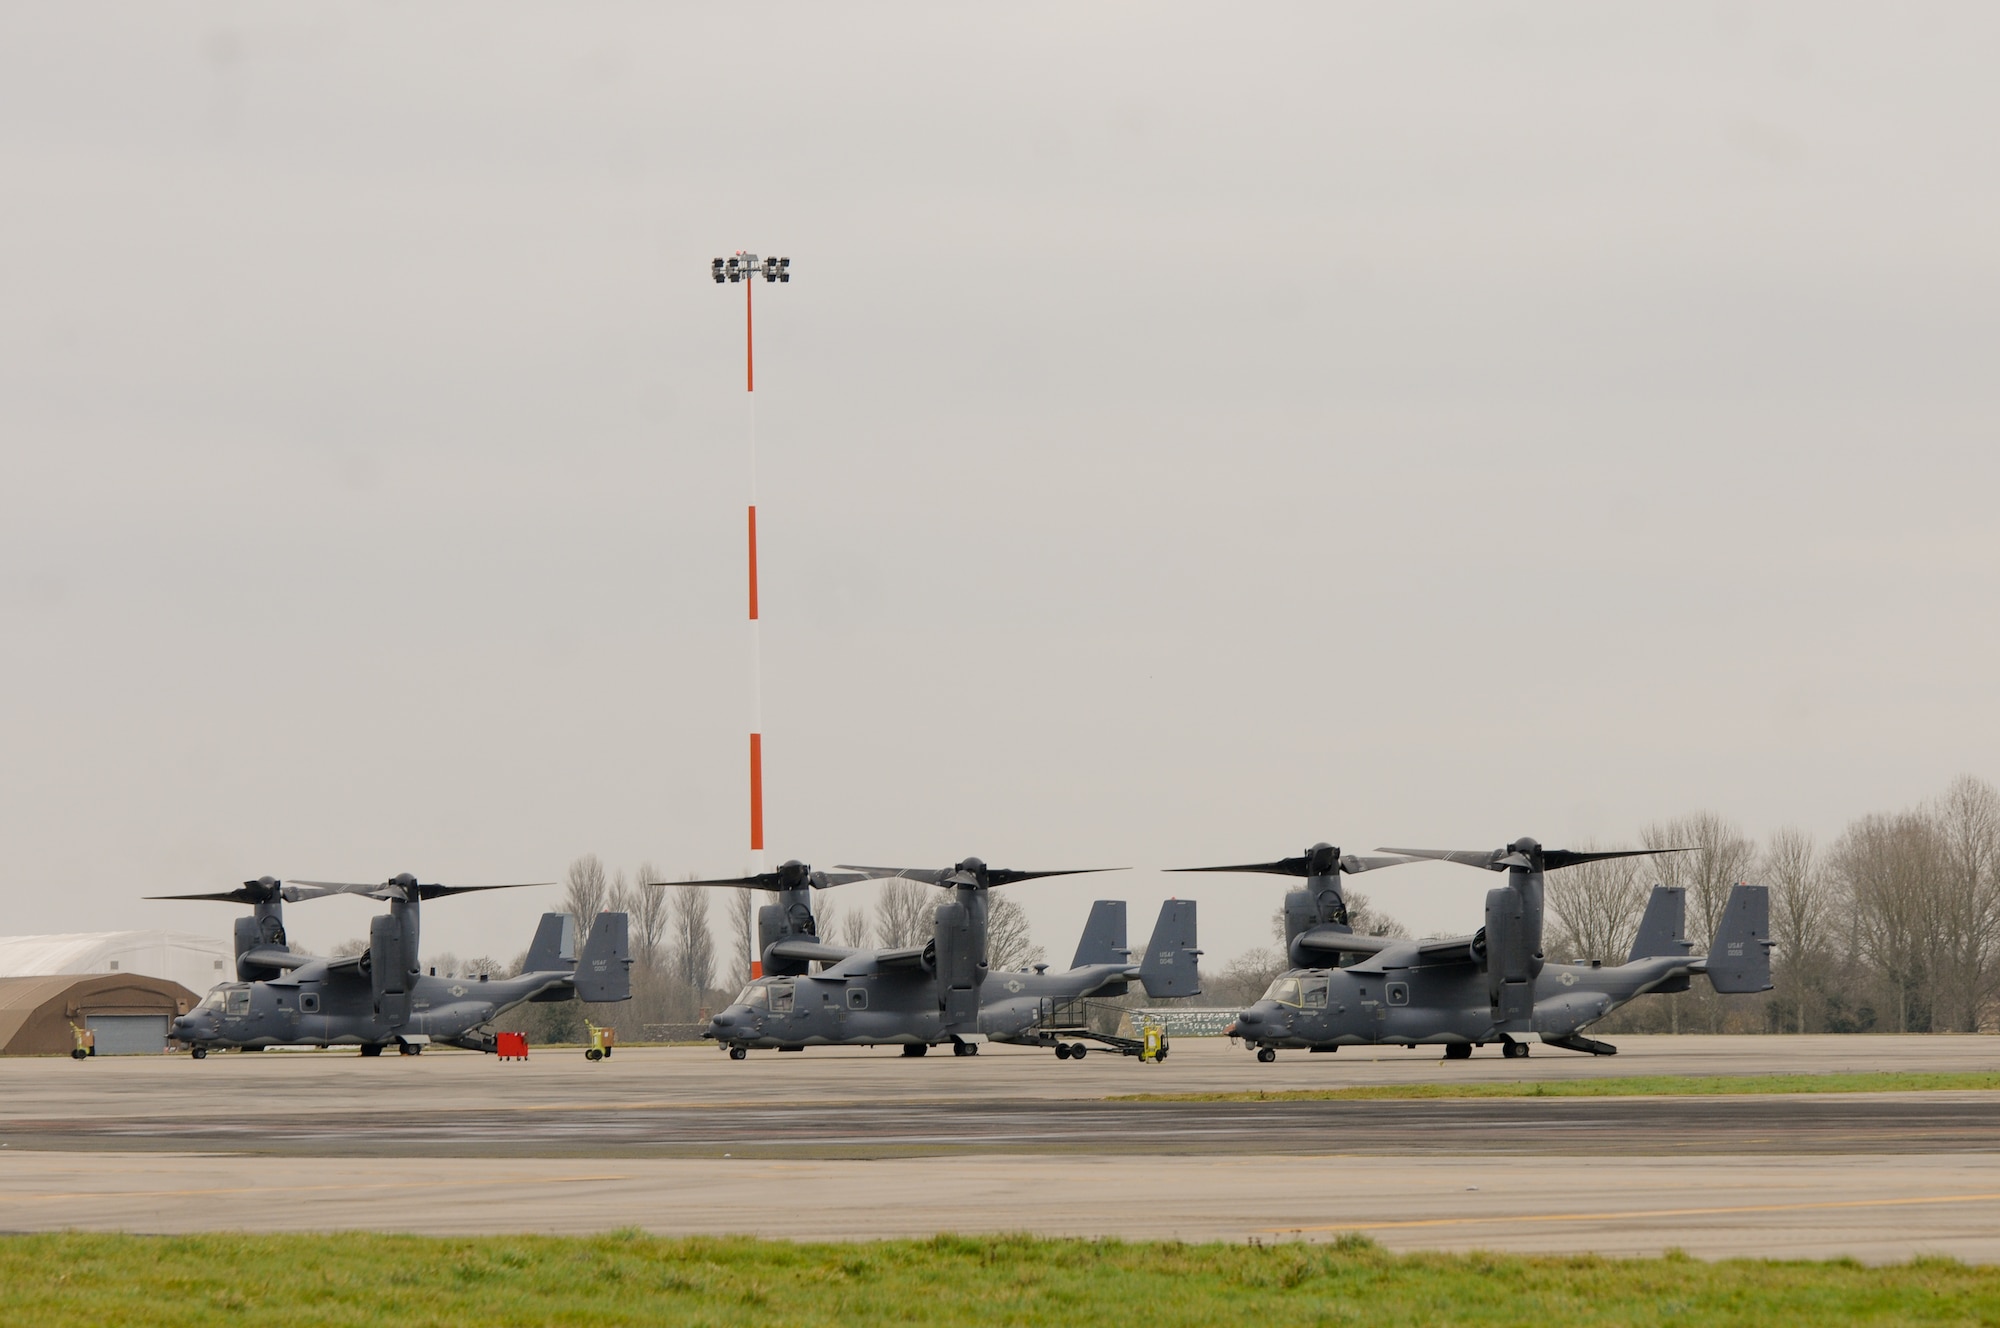 RAF FAIRFORD, United Kingdom - Three CV-22s from the 352nd Special Operations Group at RAF Mildenhall sit on the ramp at RAF Fairford Dec. 10. RAF Fairford opened its gates to more than 130 Airmen and three MC-130Js in addition to the CV-22s so the 352nd SOG could conduct a logistics exercise with their new airframes Dec. 9 to 12. (U.S. Air Force photo by Tech. Sgt. Chrissy Best)